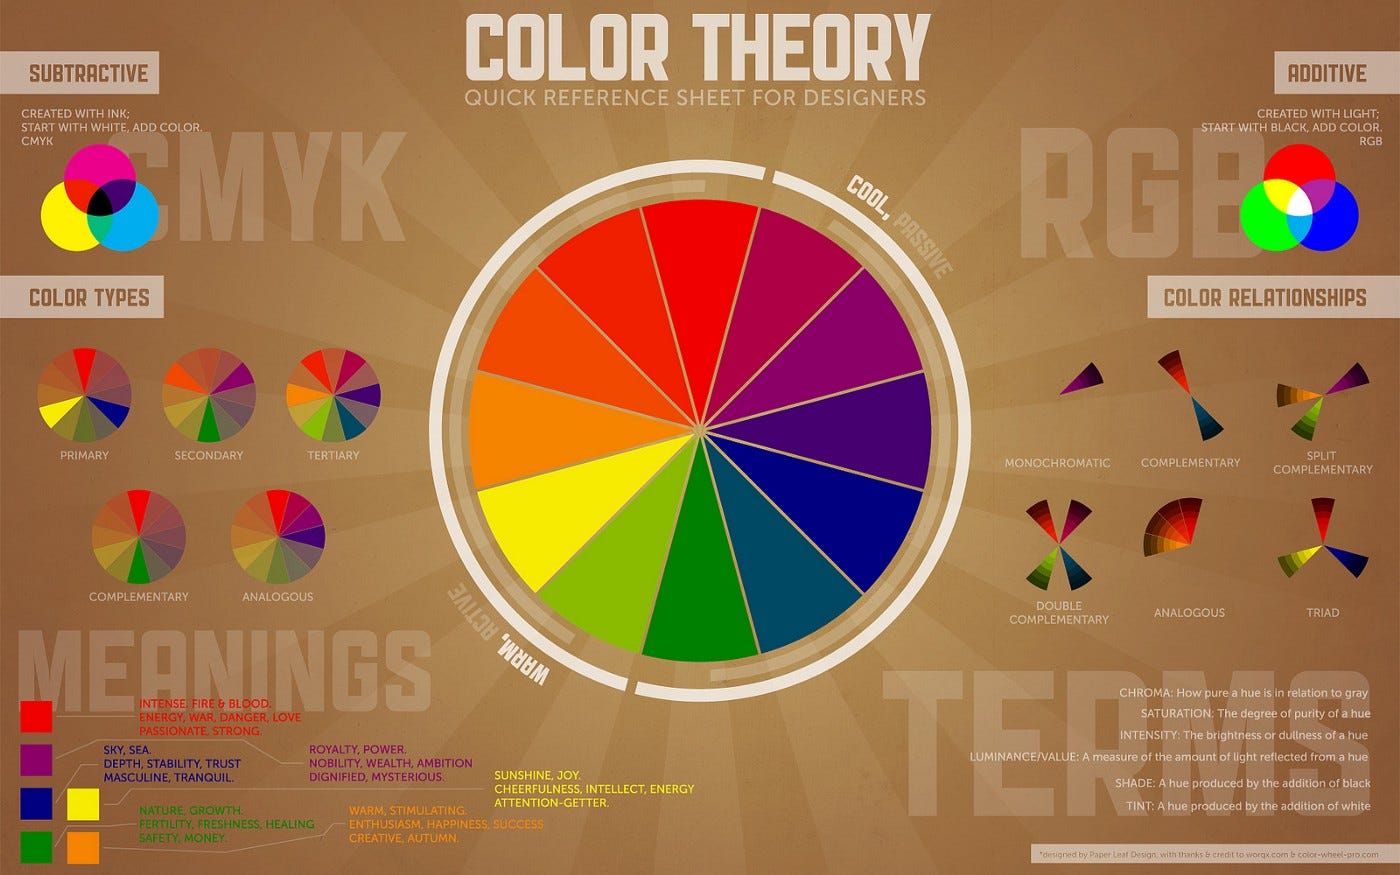 Introduction to graphic design: color theory #part 3, by Sohaib zenati